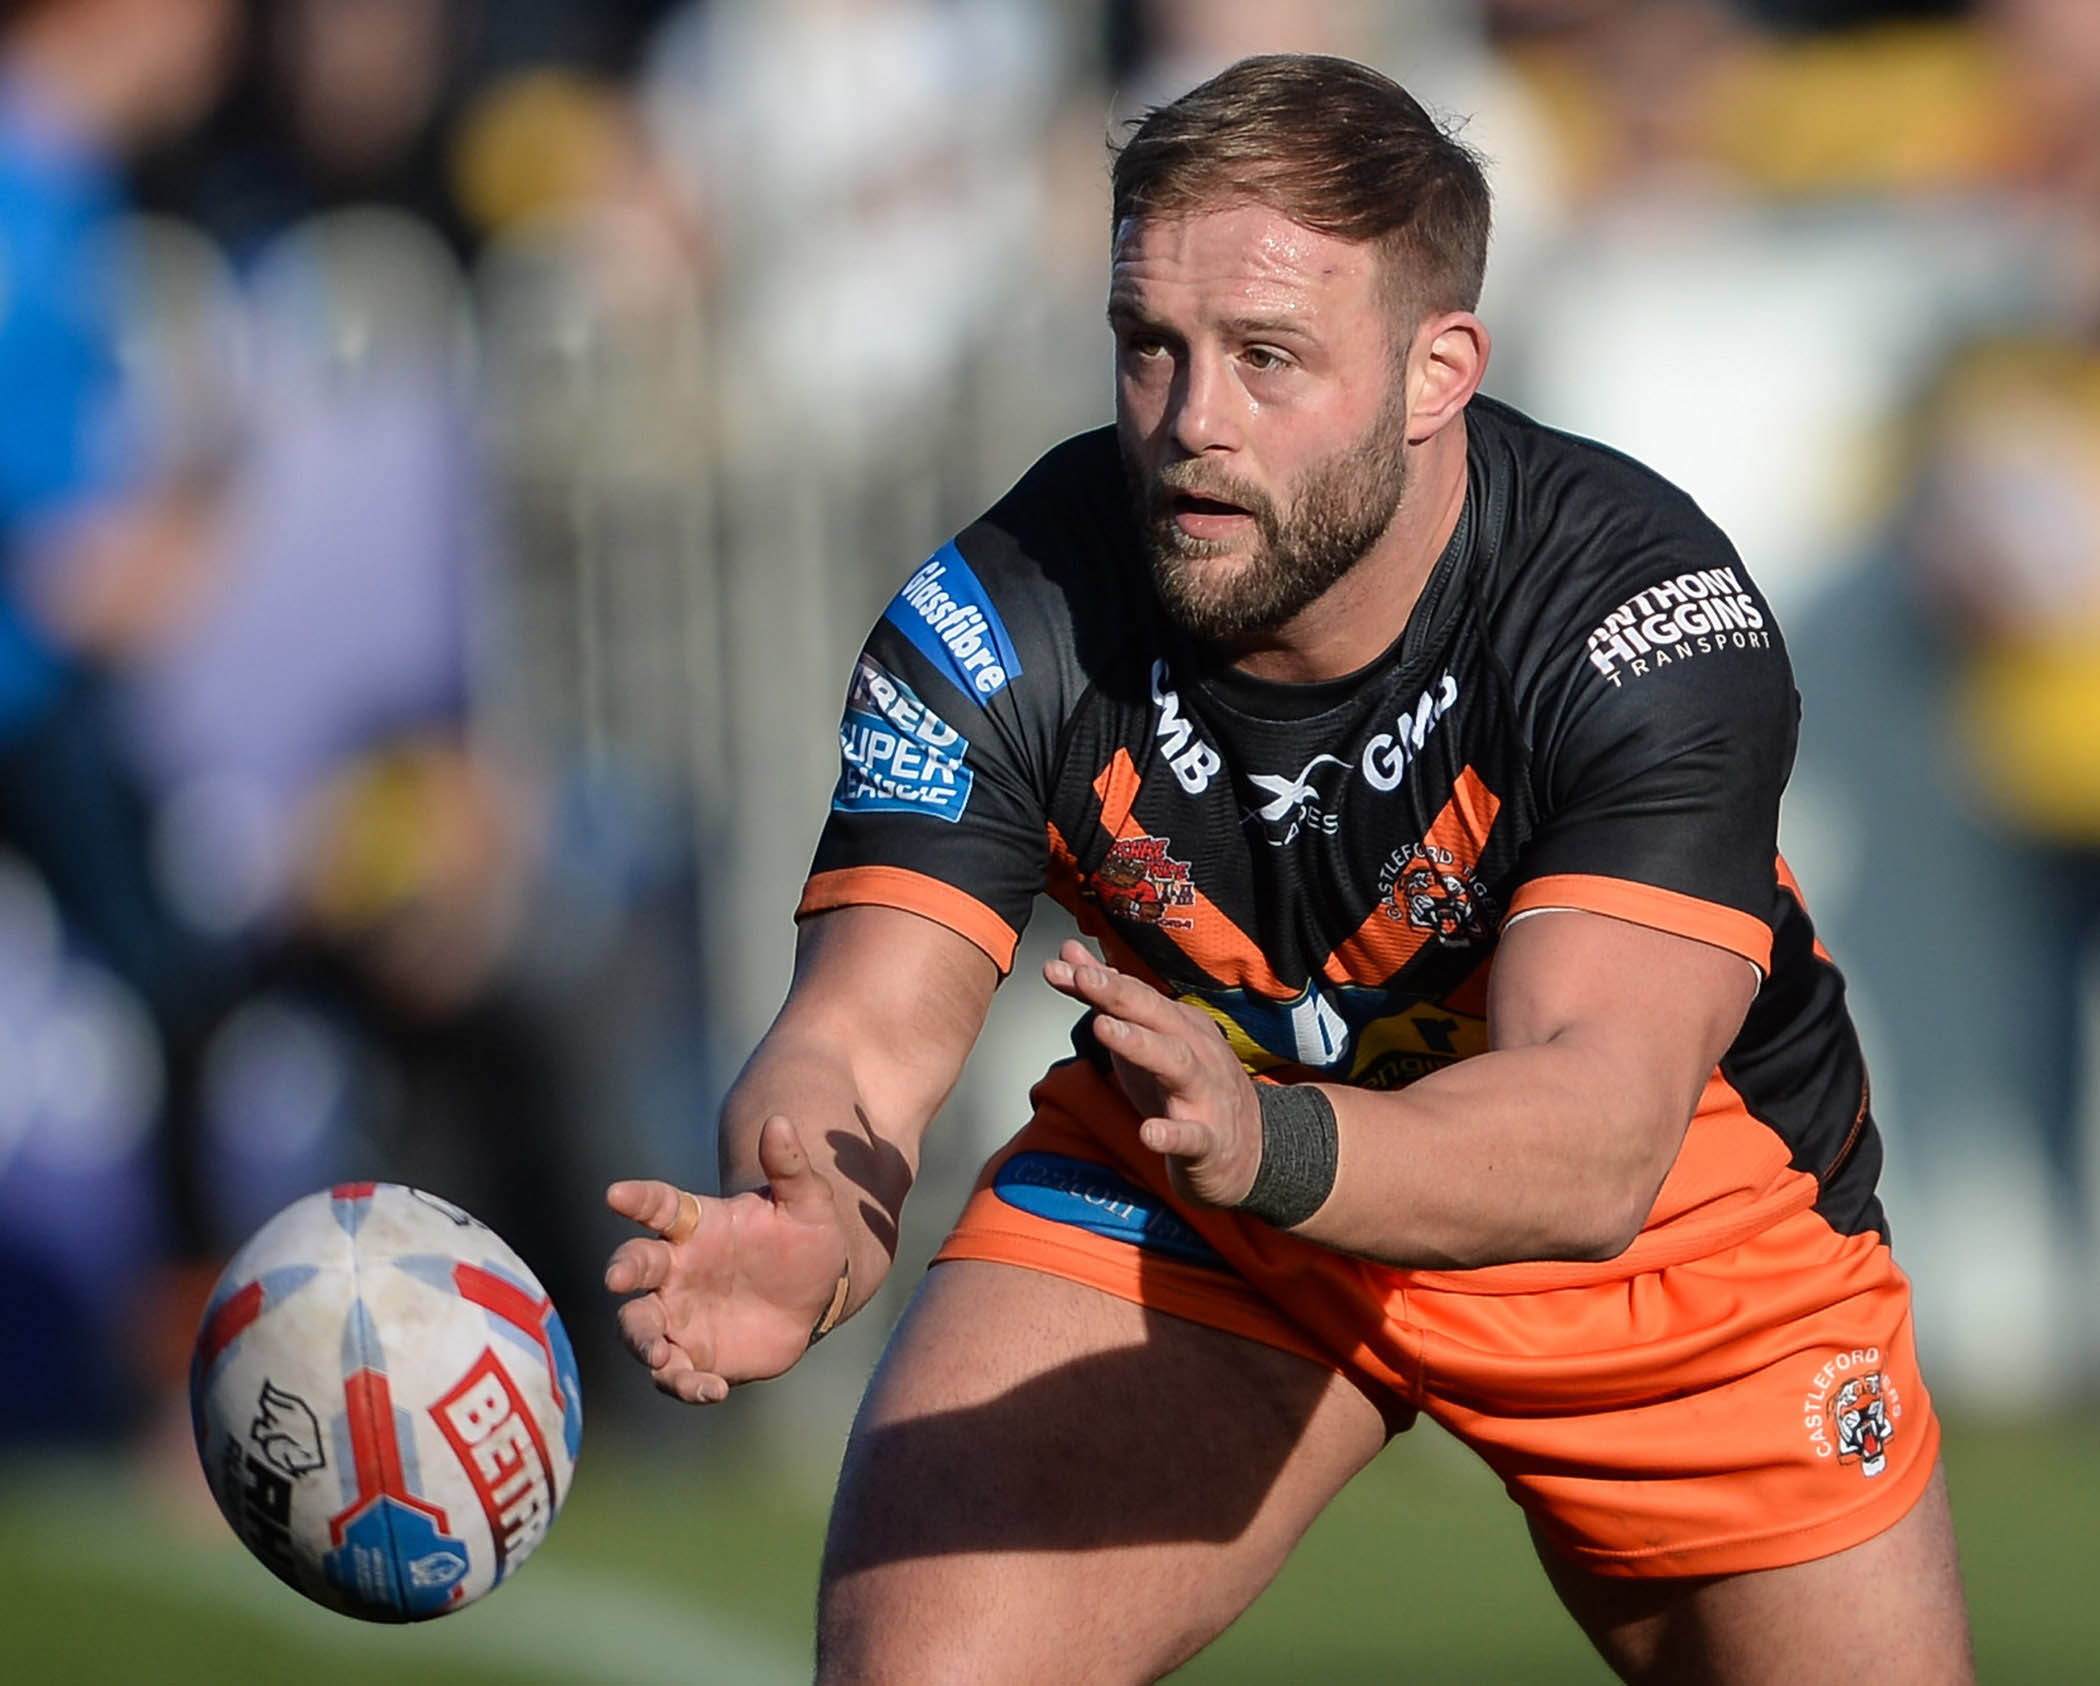 Five things to look forward to: Castleford look to keep the ball rolling, Barba returns for Hull clash, Warrington visit in-form Wigan